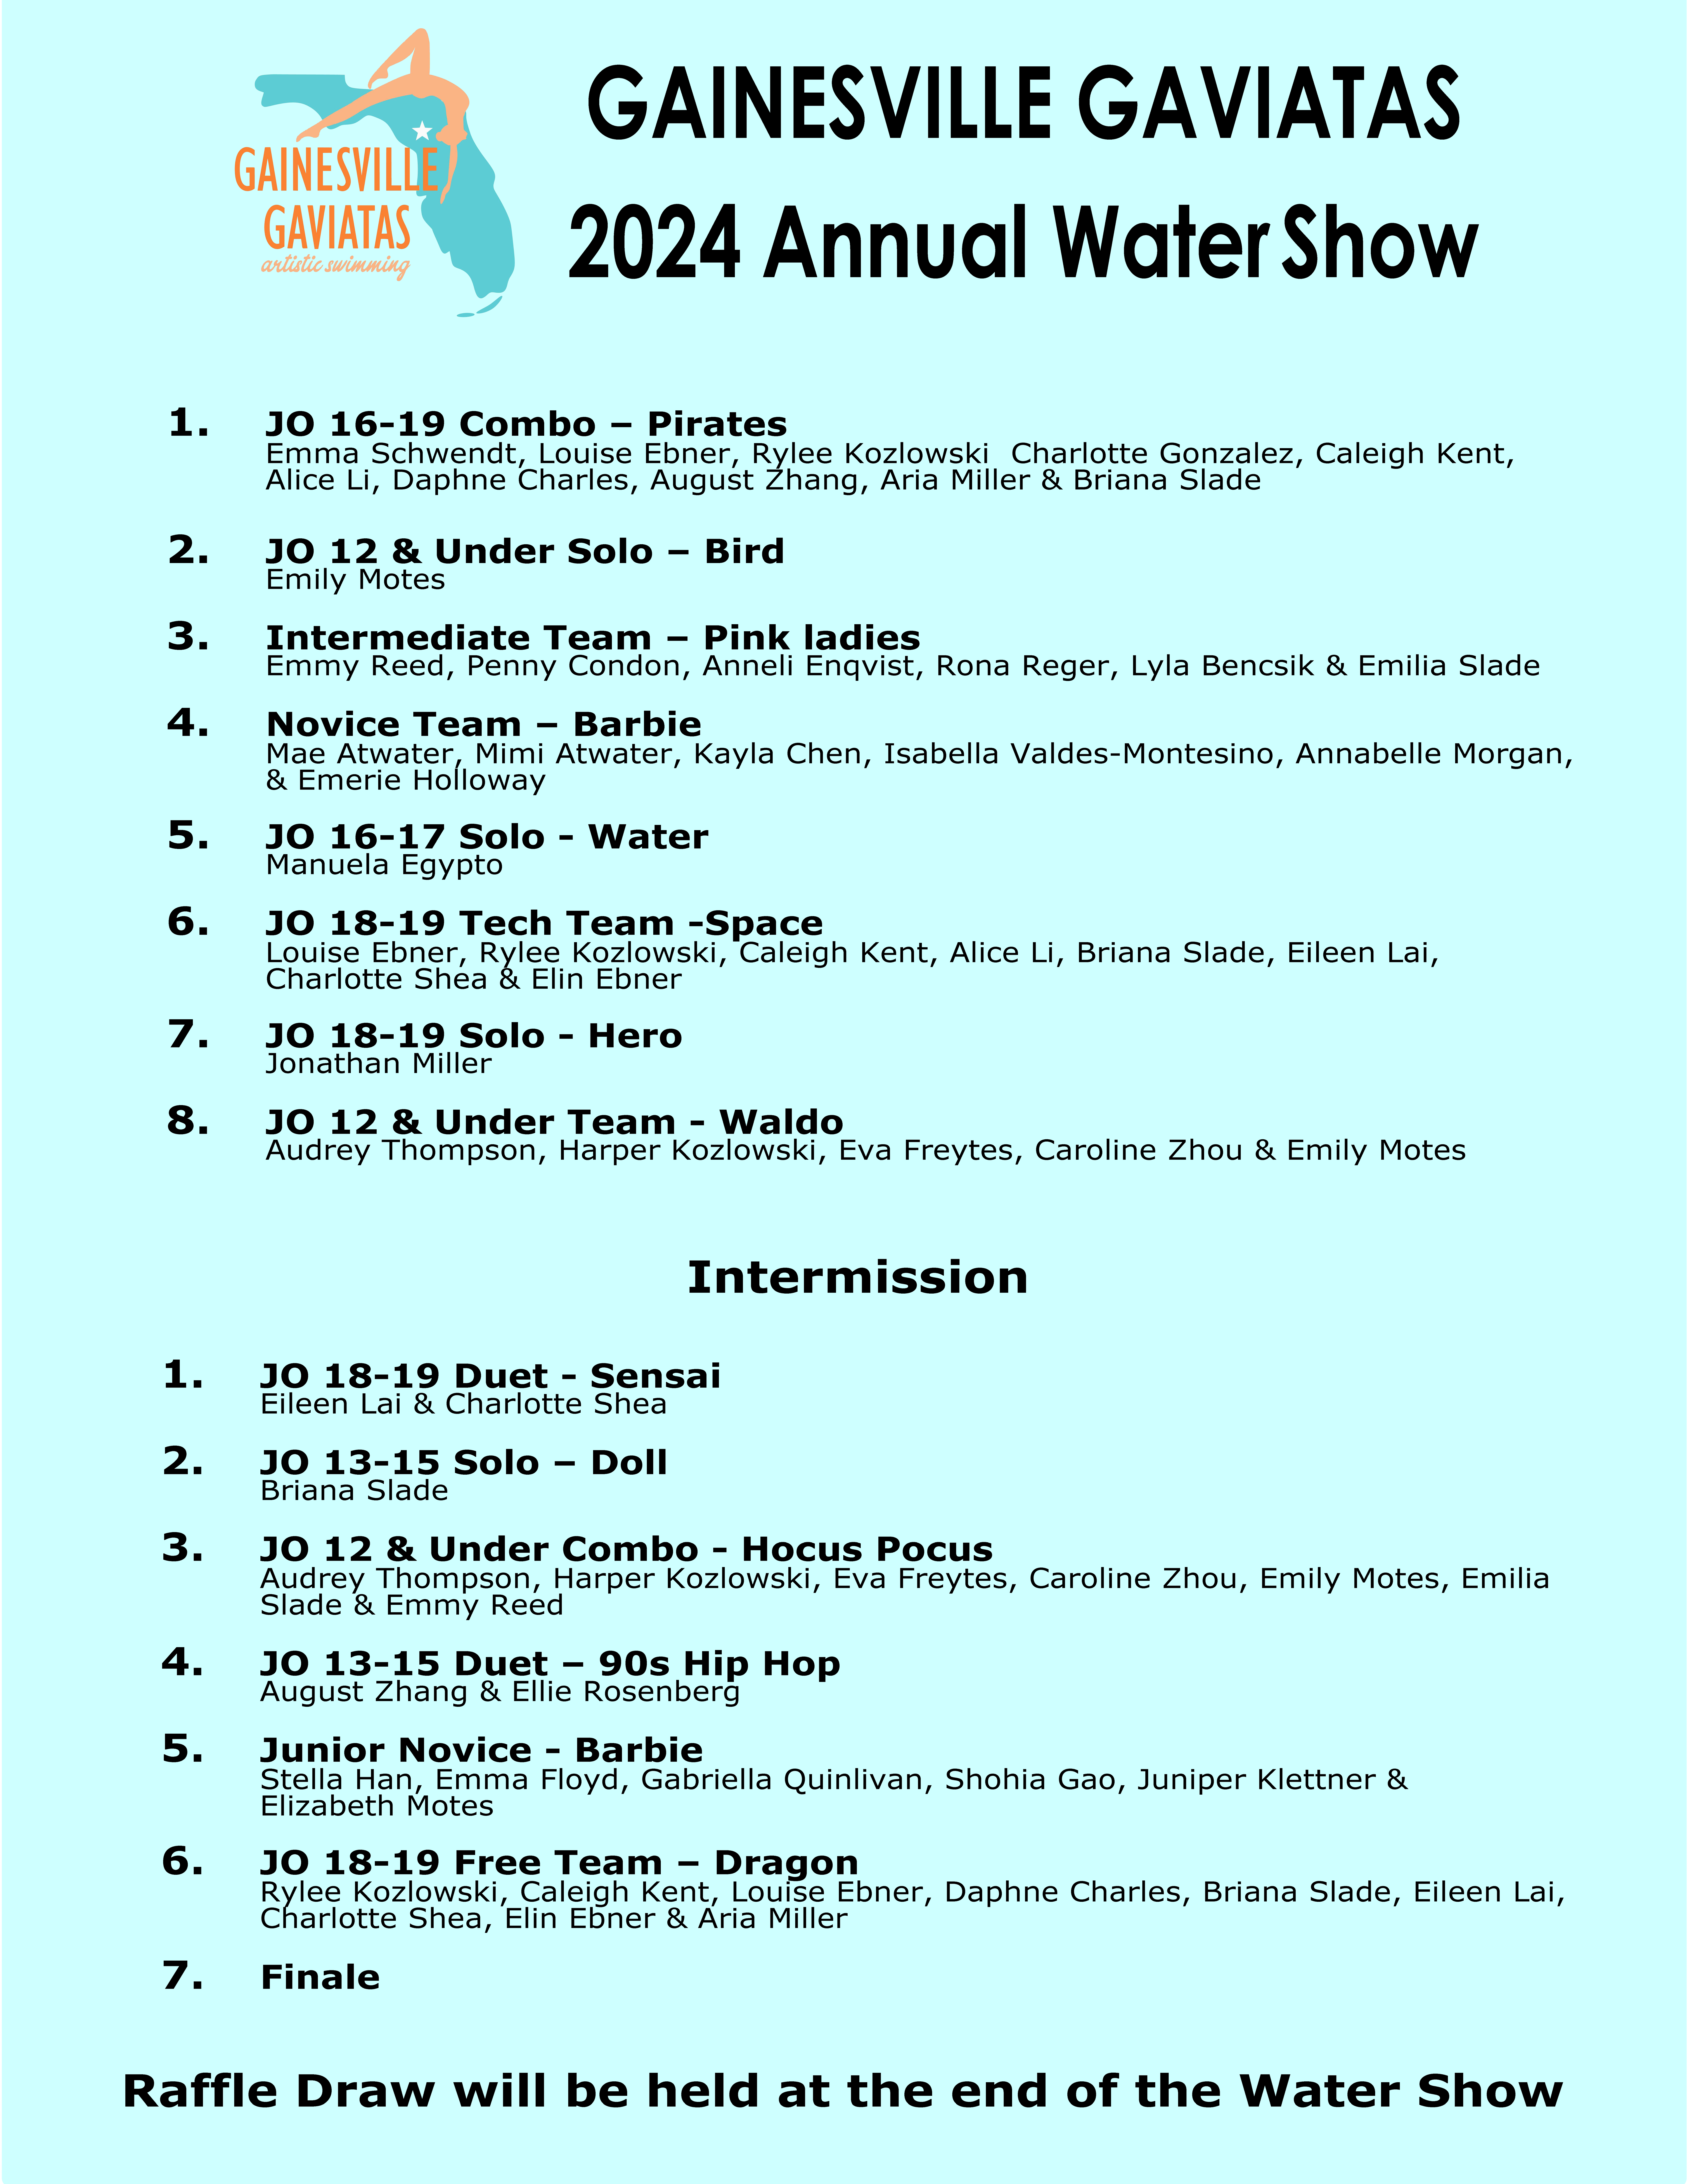 Program for 2024 Water Show by the Gaviatas team